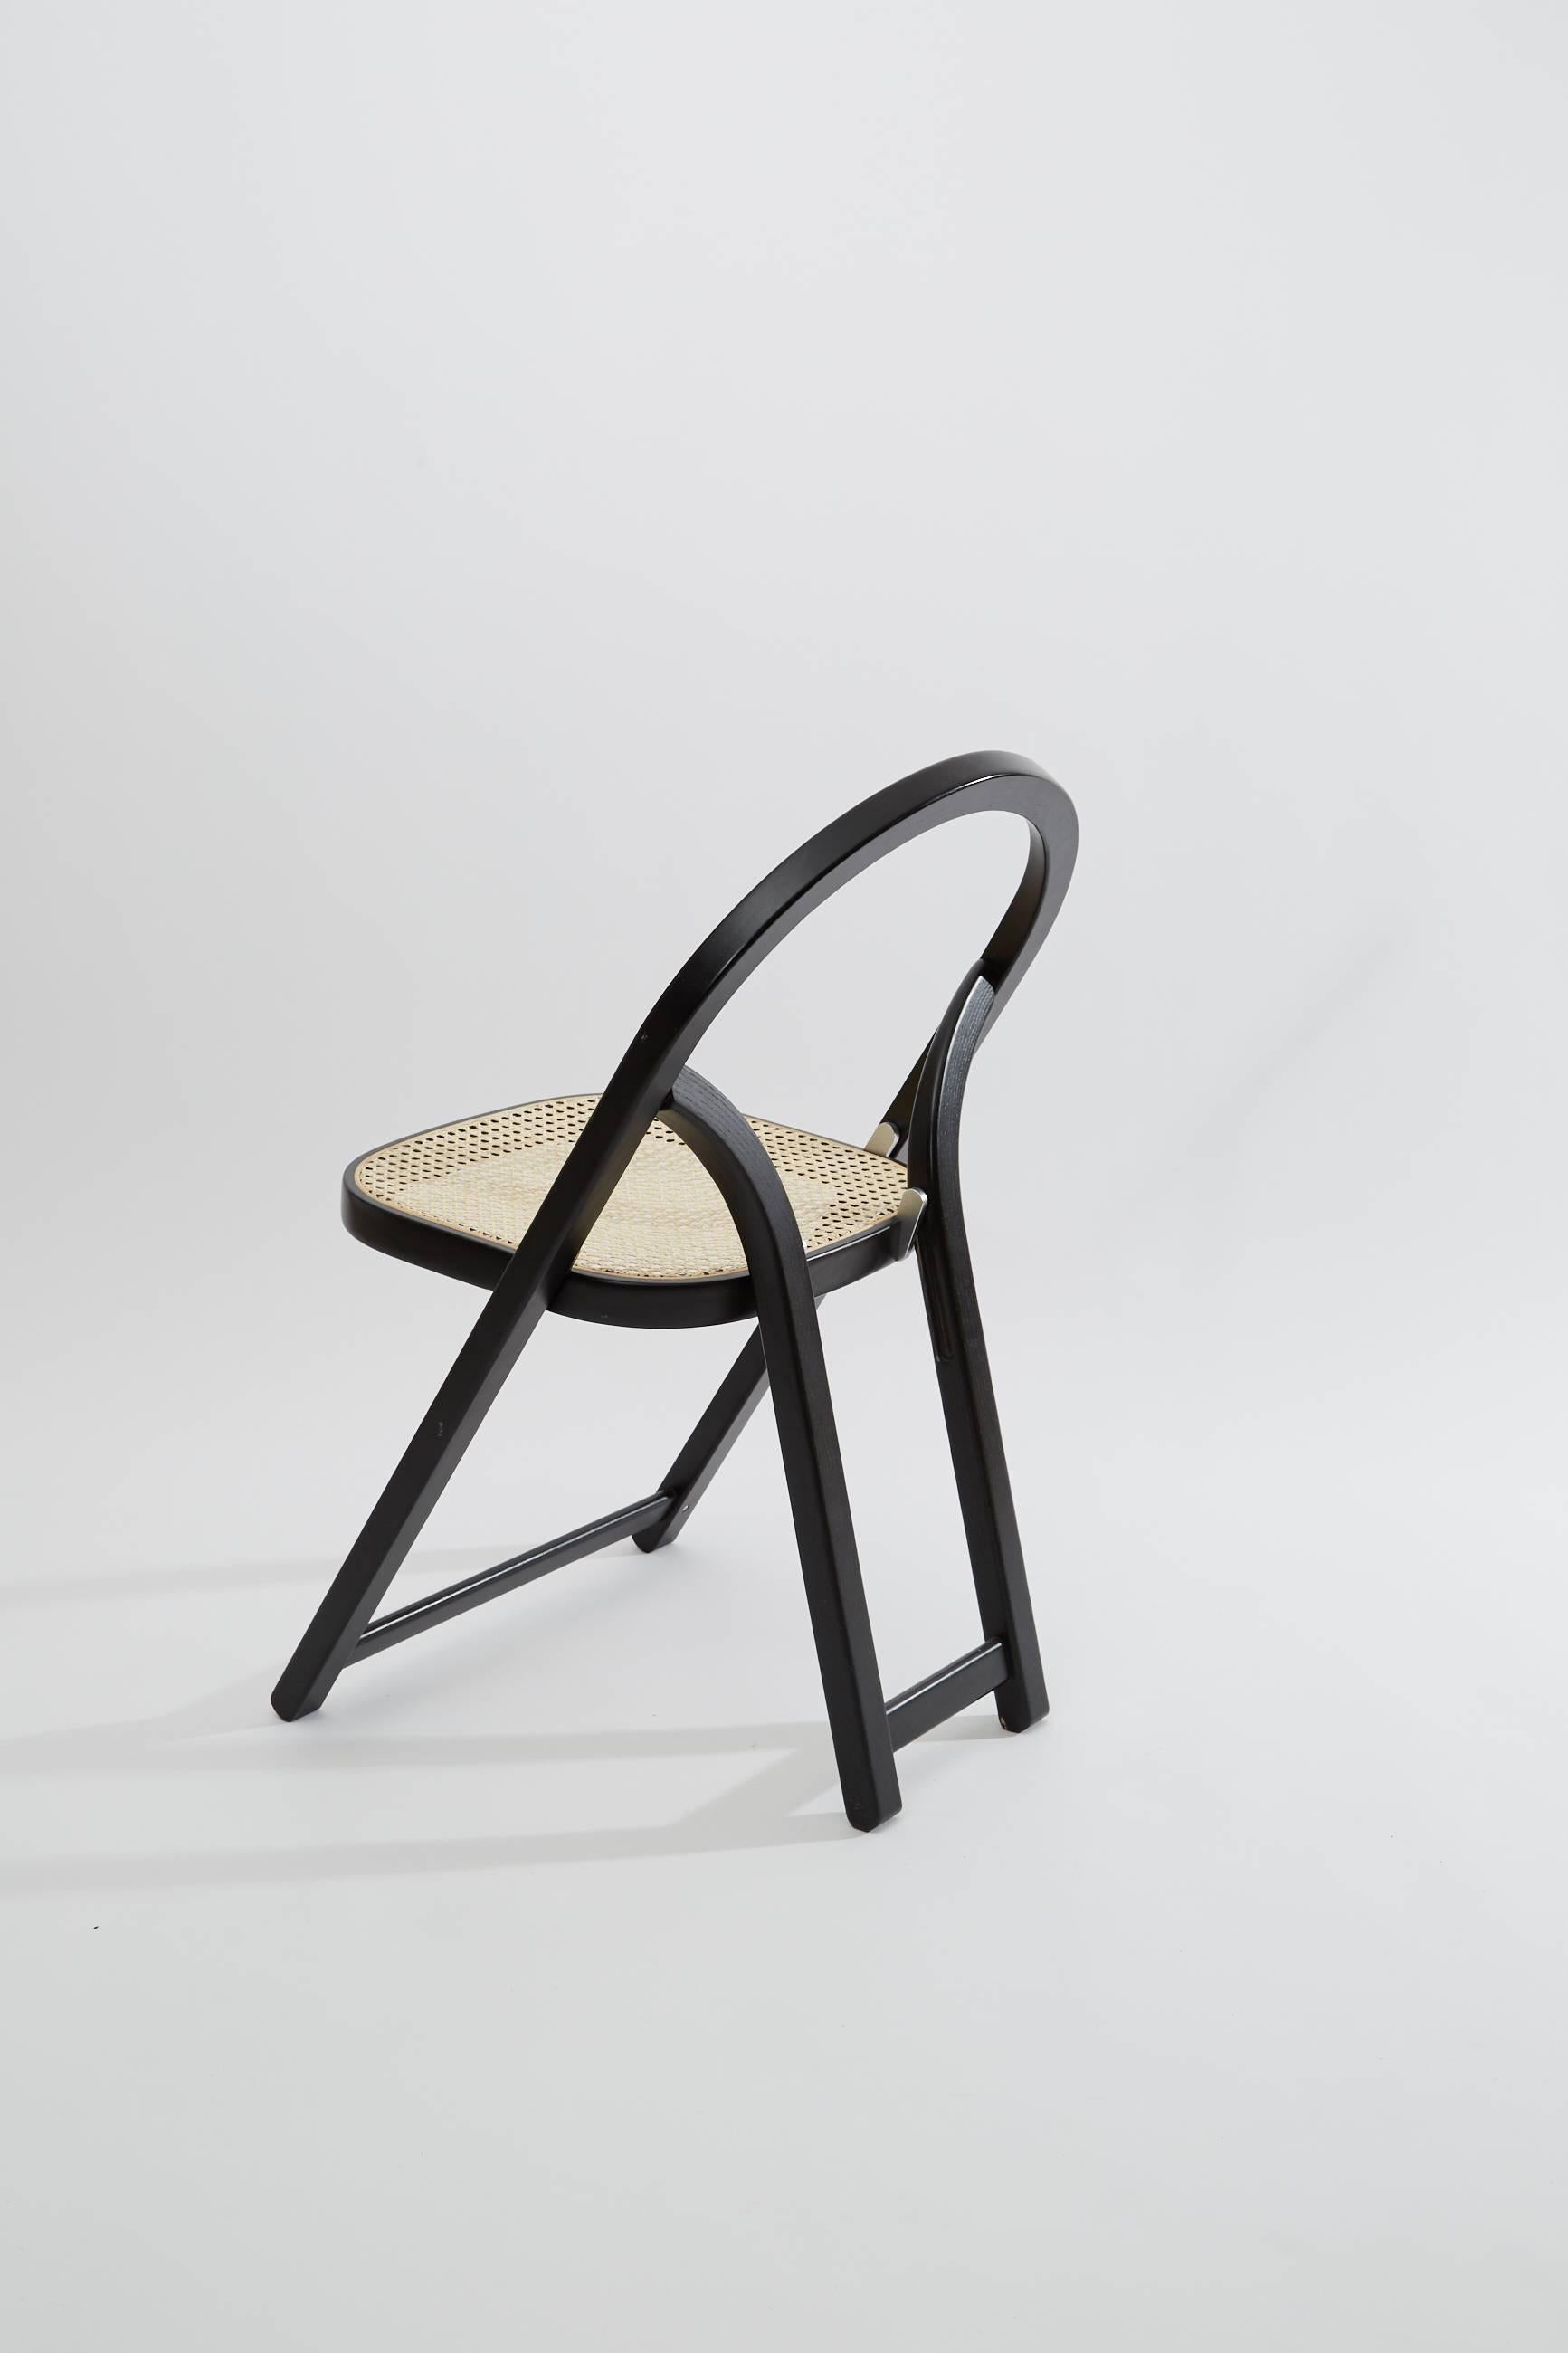 Late 20th Century Gigi Sabadin Crassevig Arca Folding Chair in Black Wood and Natural Rattan, 1974 For Sale